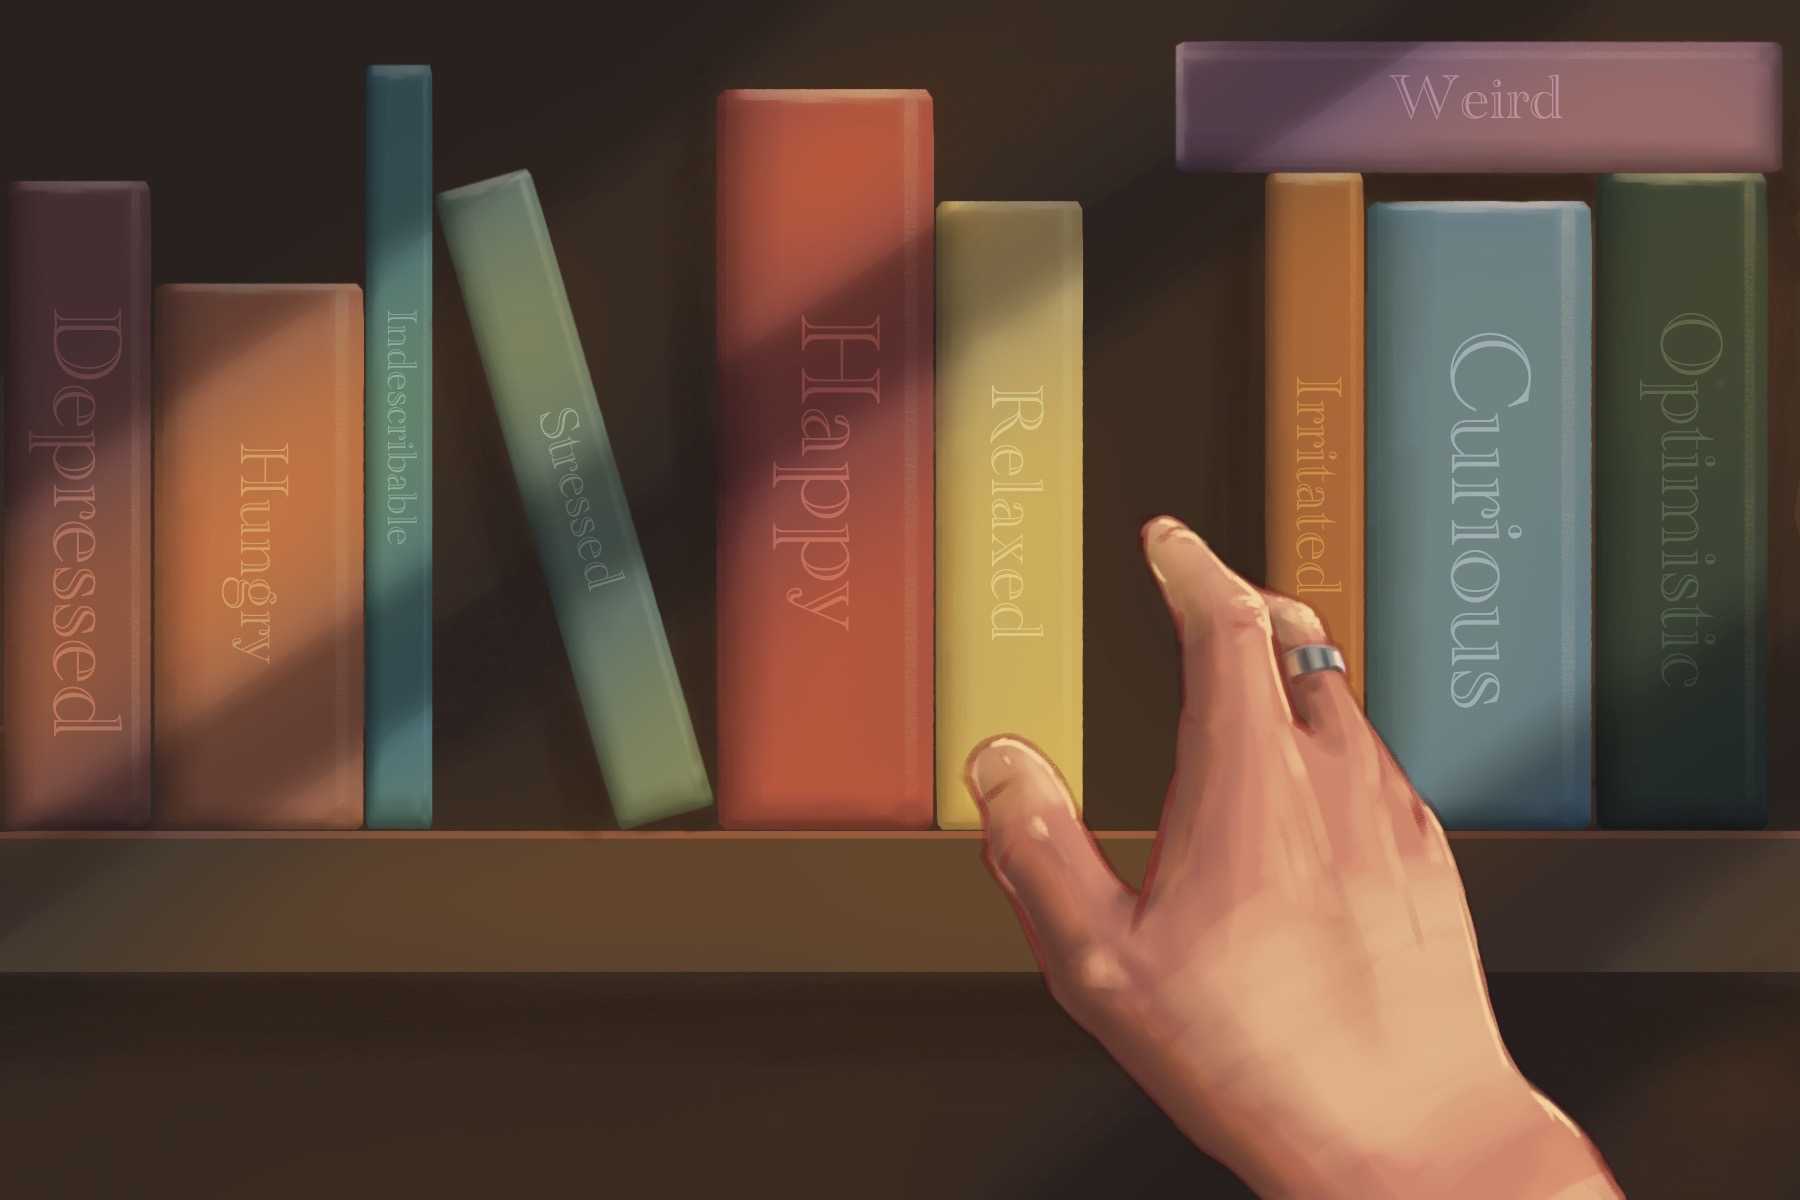 An illustration of a hand reaching up a bookcase full of books each labeled by a mood.